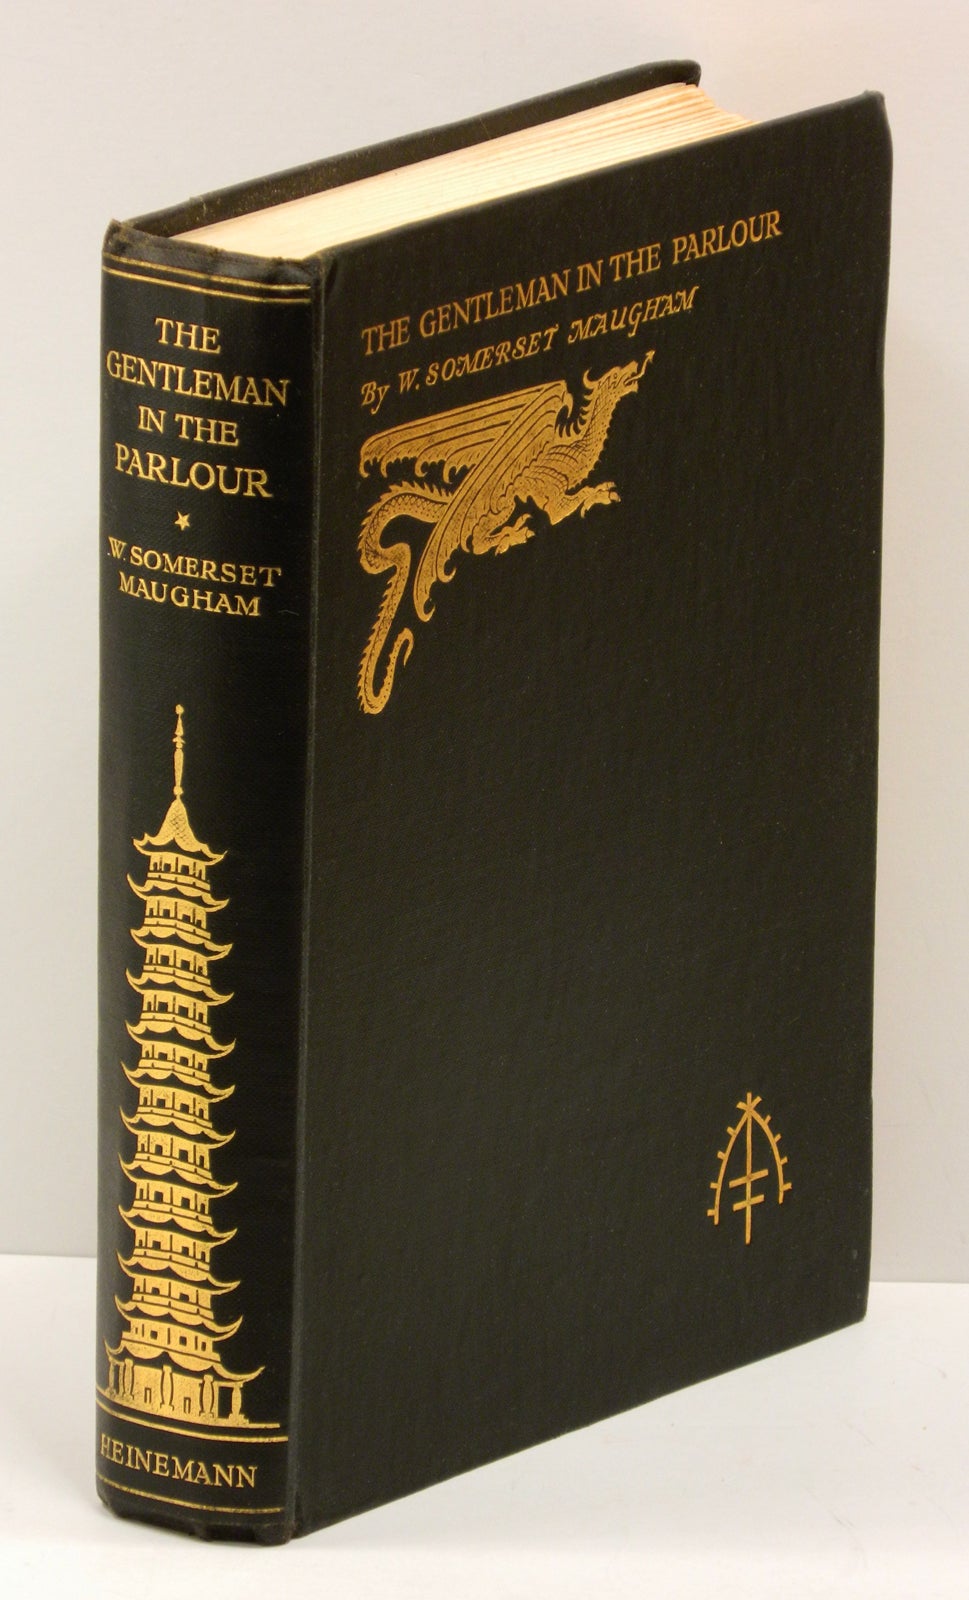 THE GENTLEMAN IN THE PARLOUR: A Record of a Journey from Rangoon to  Haiphong by W. Somerset Maugham on Quill & Brush, Inc